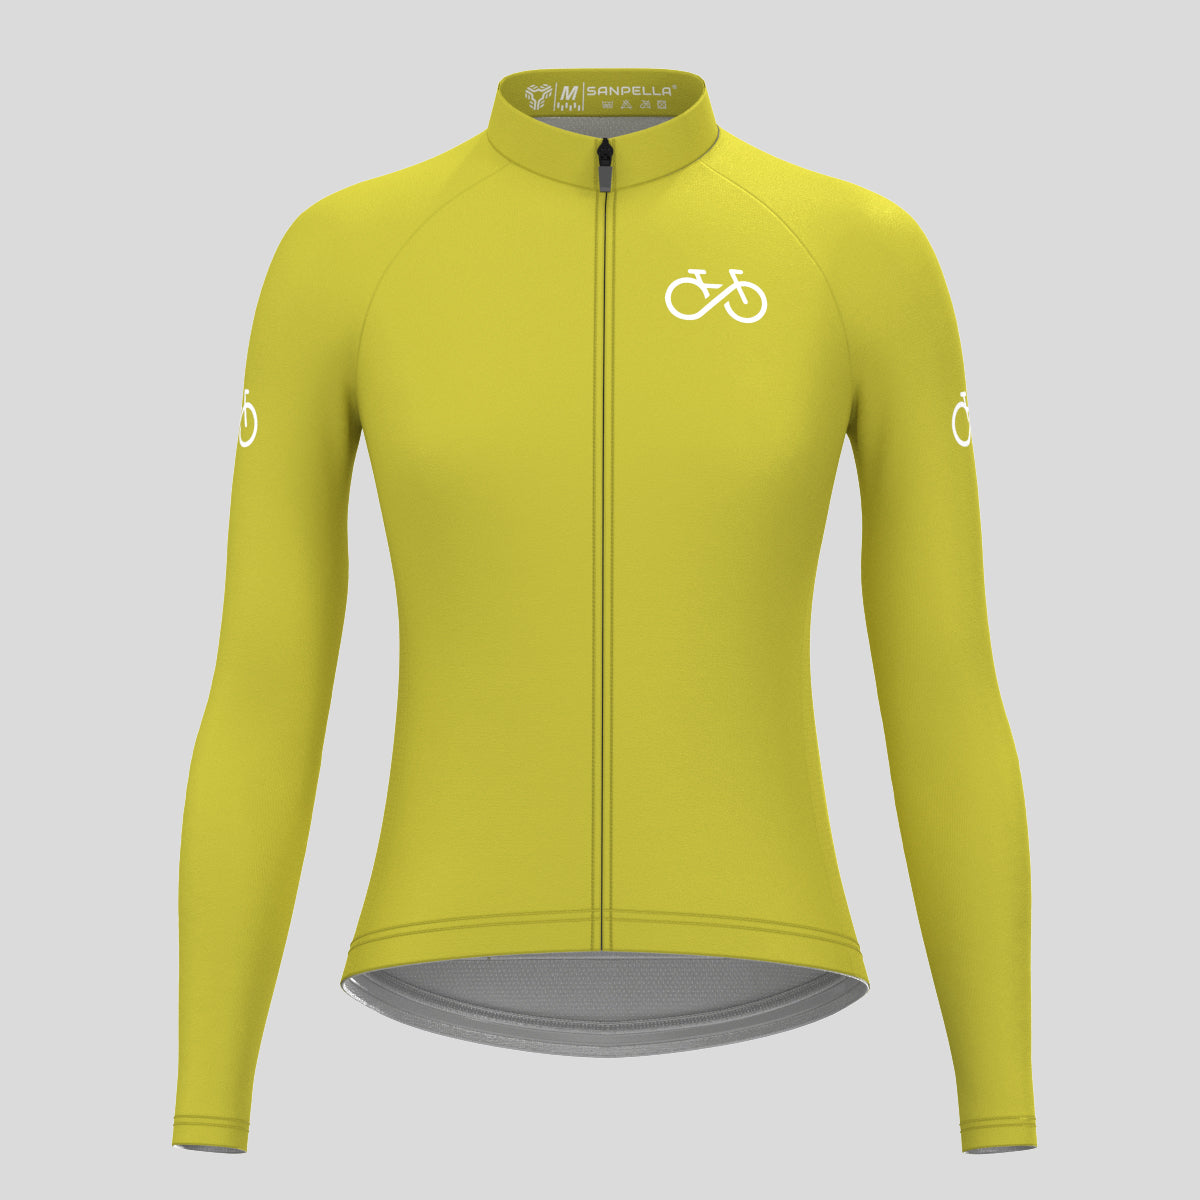 Ride Forever Women's LS Cycling Jersey - Fern